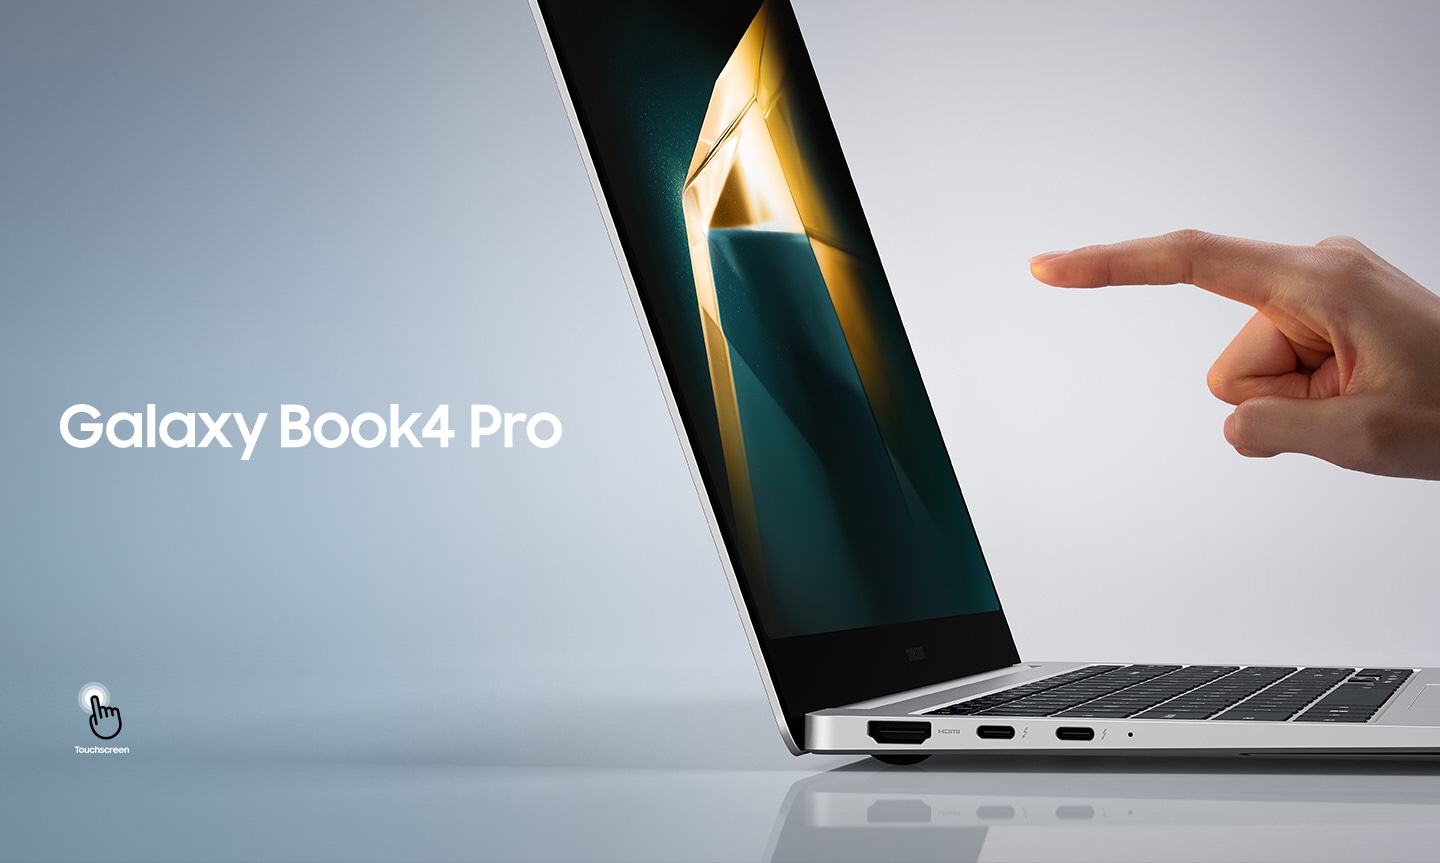 Galaxy Book4 Pro in Platinum Silver is open, facing right with a dark green and yellow wallpaper onscreen and a person's hand about to touch the screen with an index finger. Touchscreen icon shown.